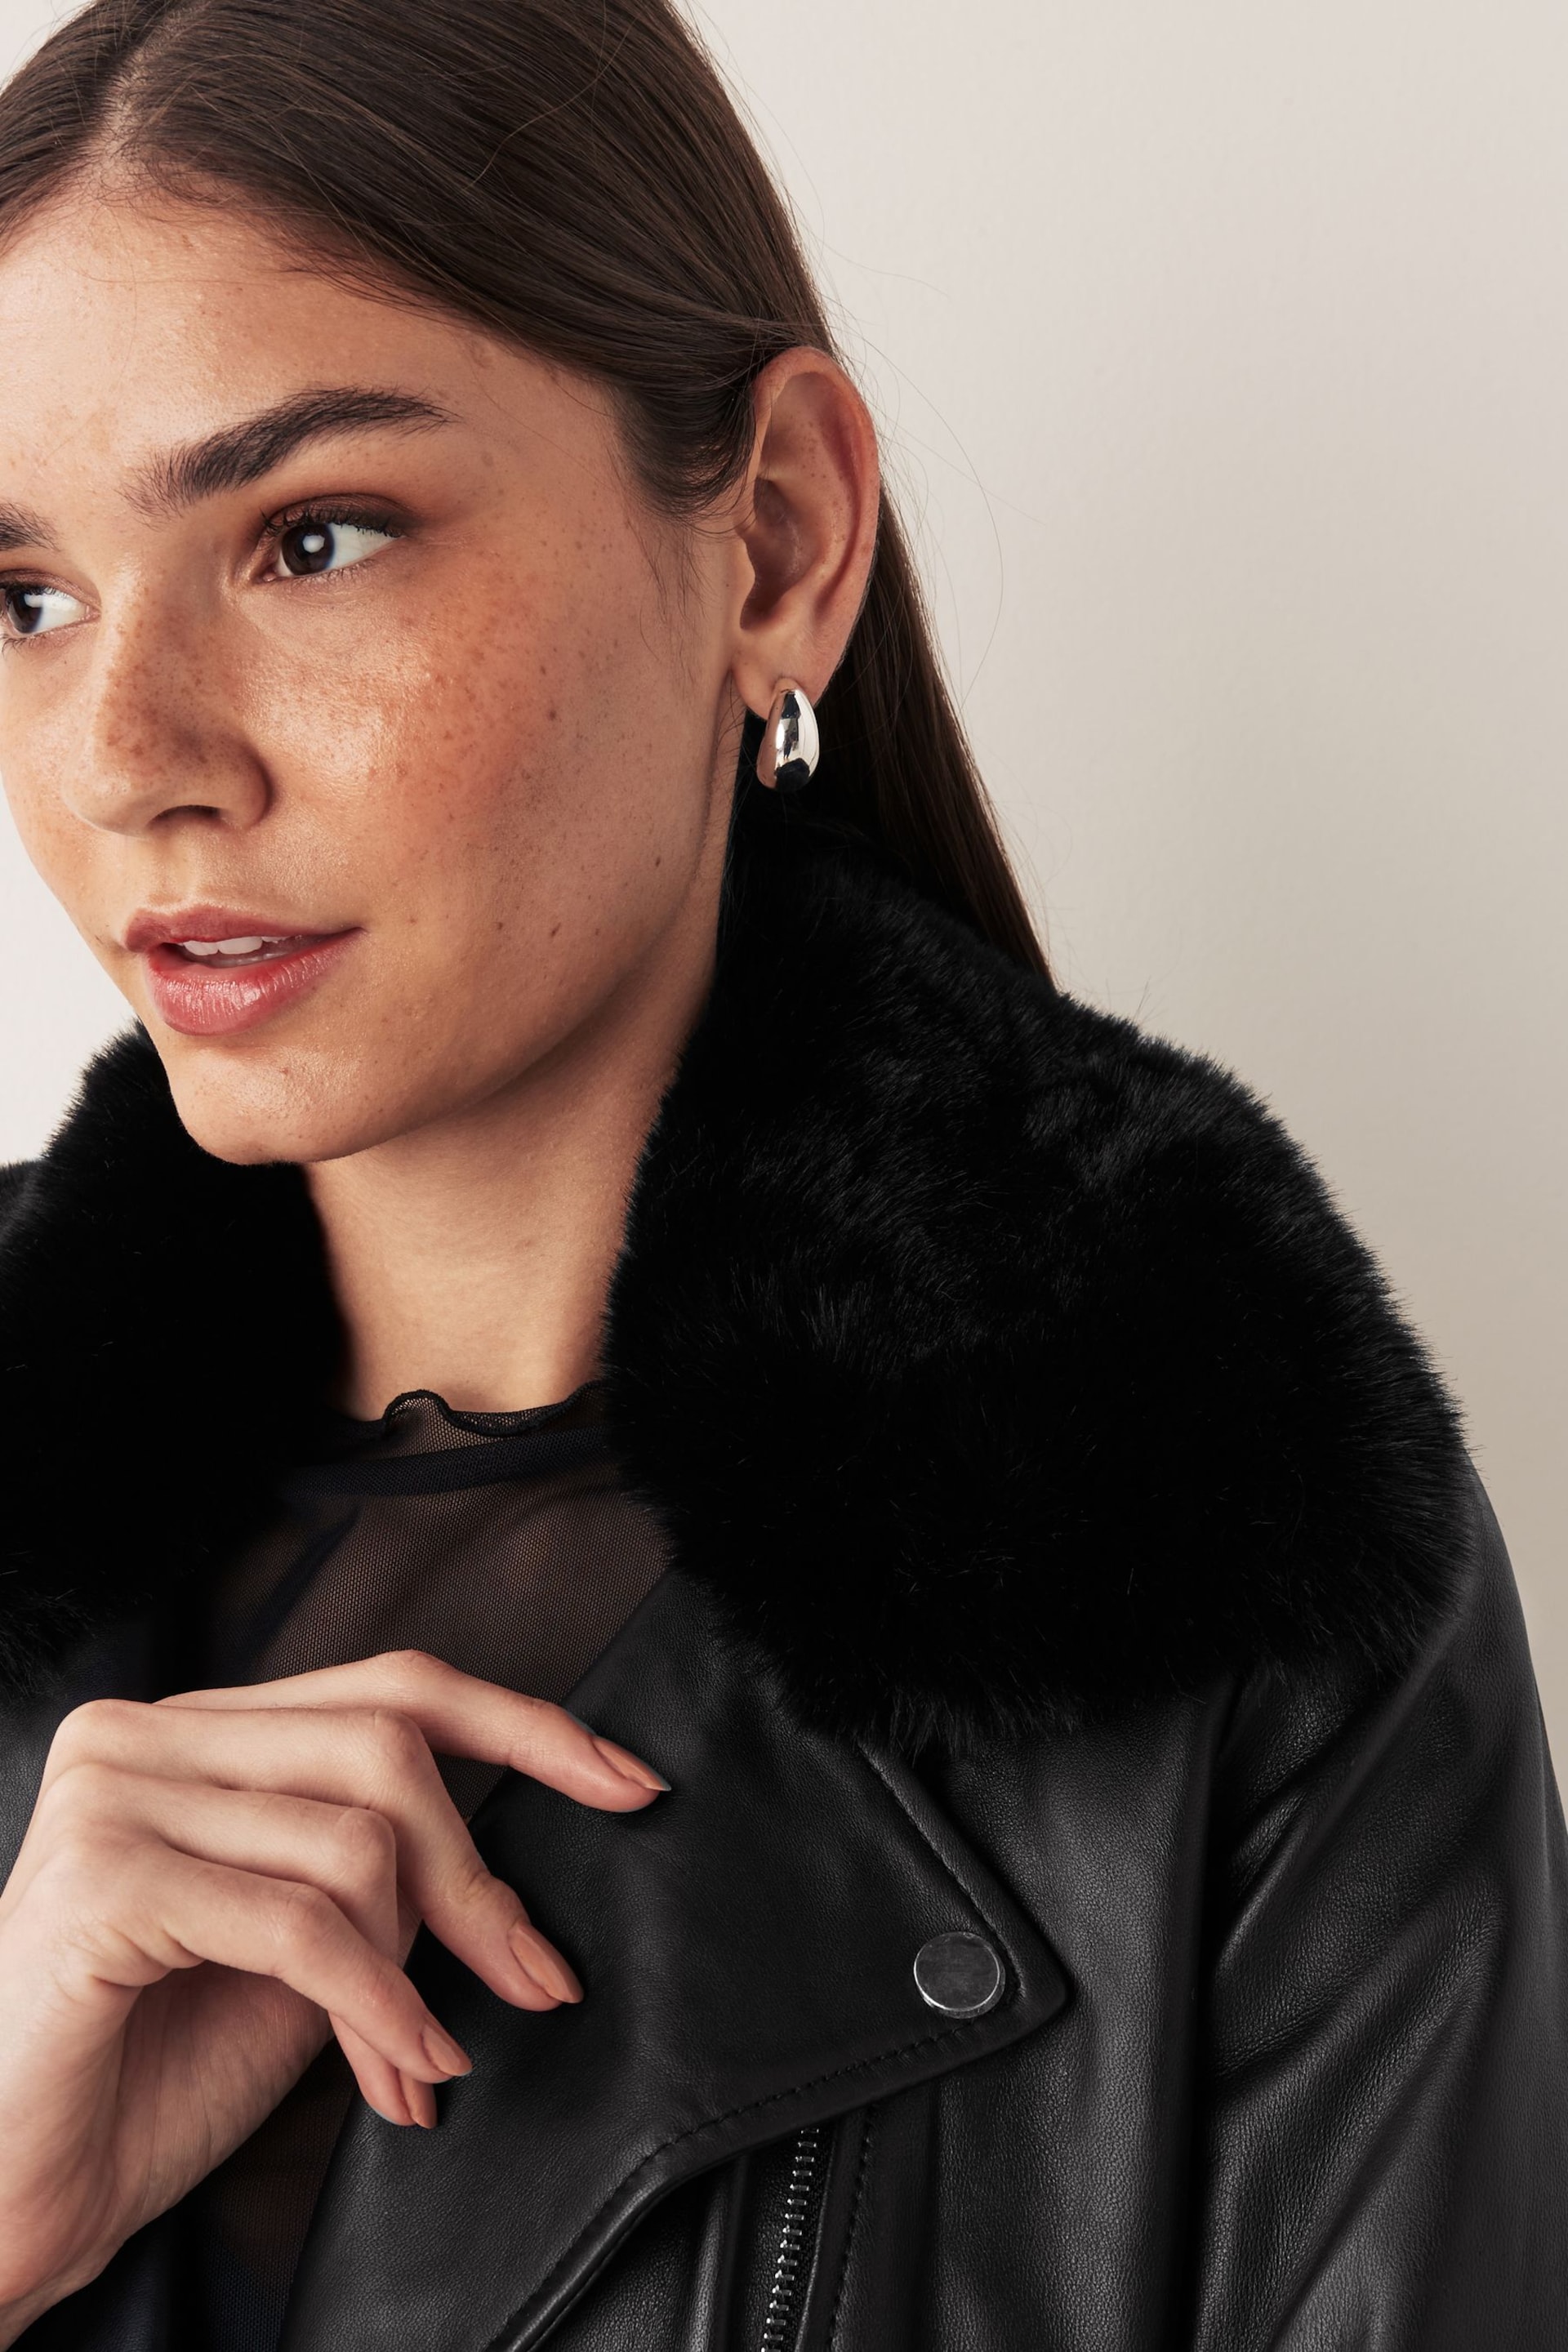 Urban Code Black Leather Biker With Removable Faux Fur Collar Jacket - Image 4 of 8